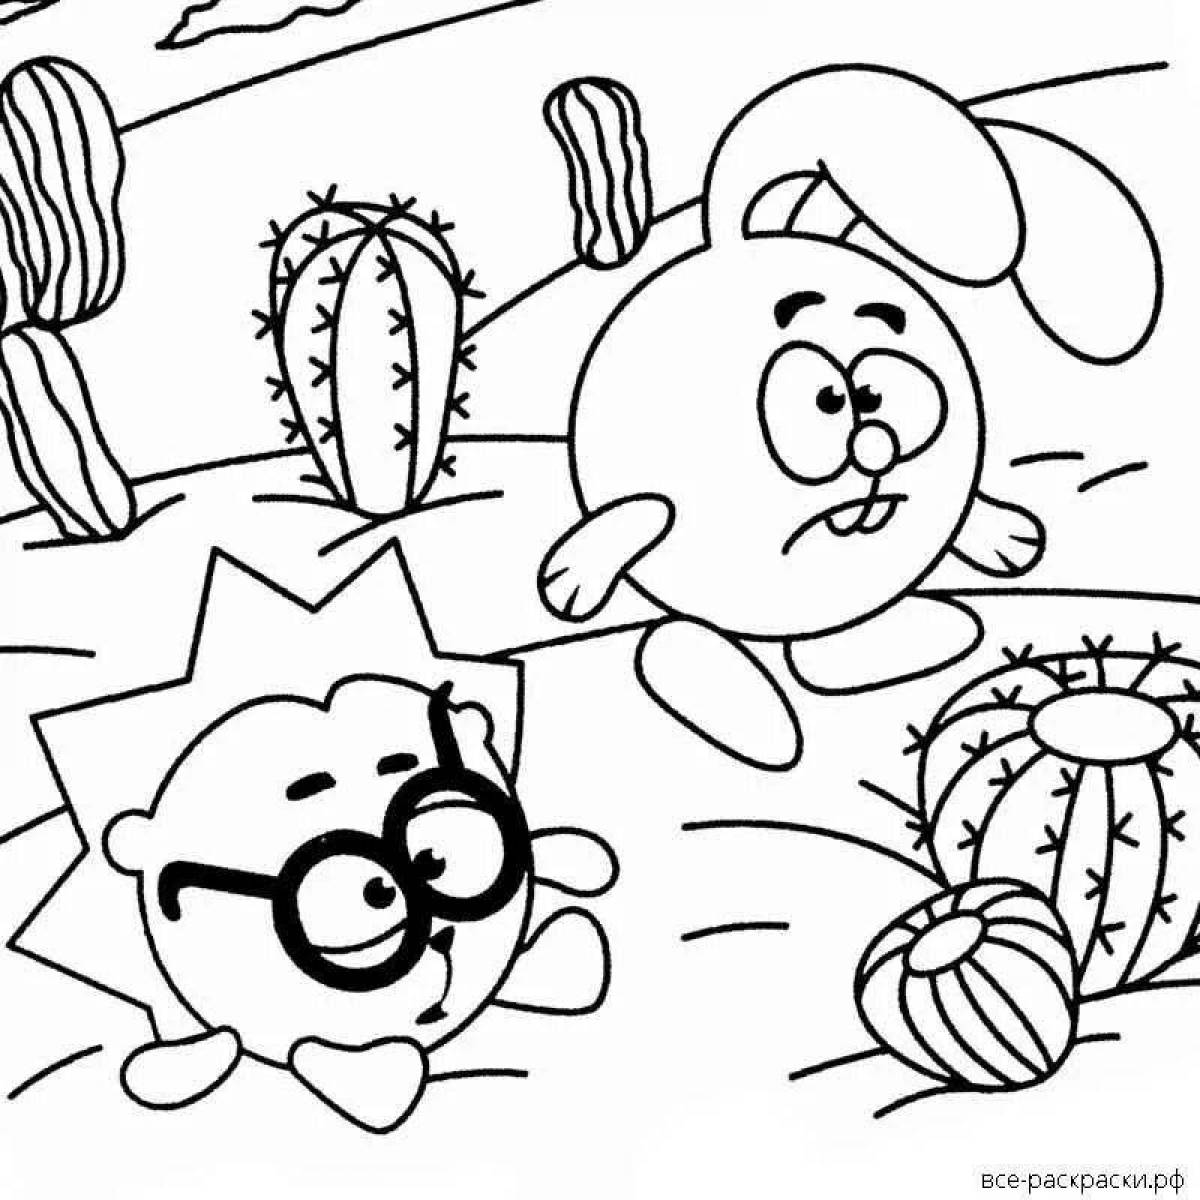 Coloring radiant baby and hedgehog